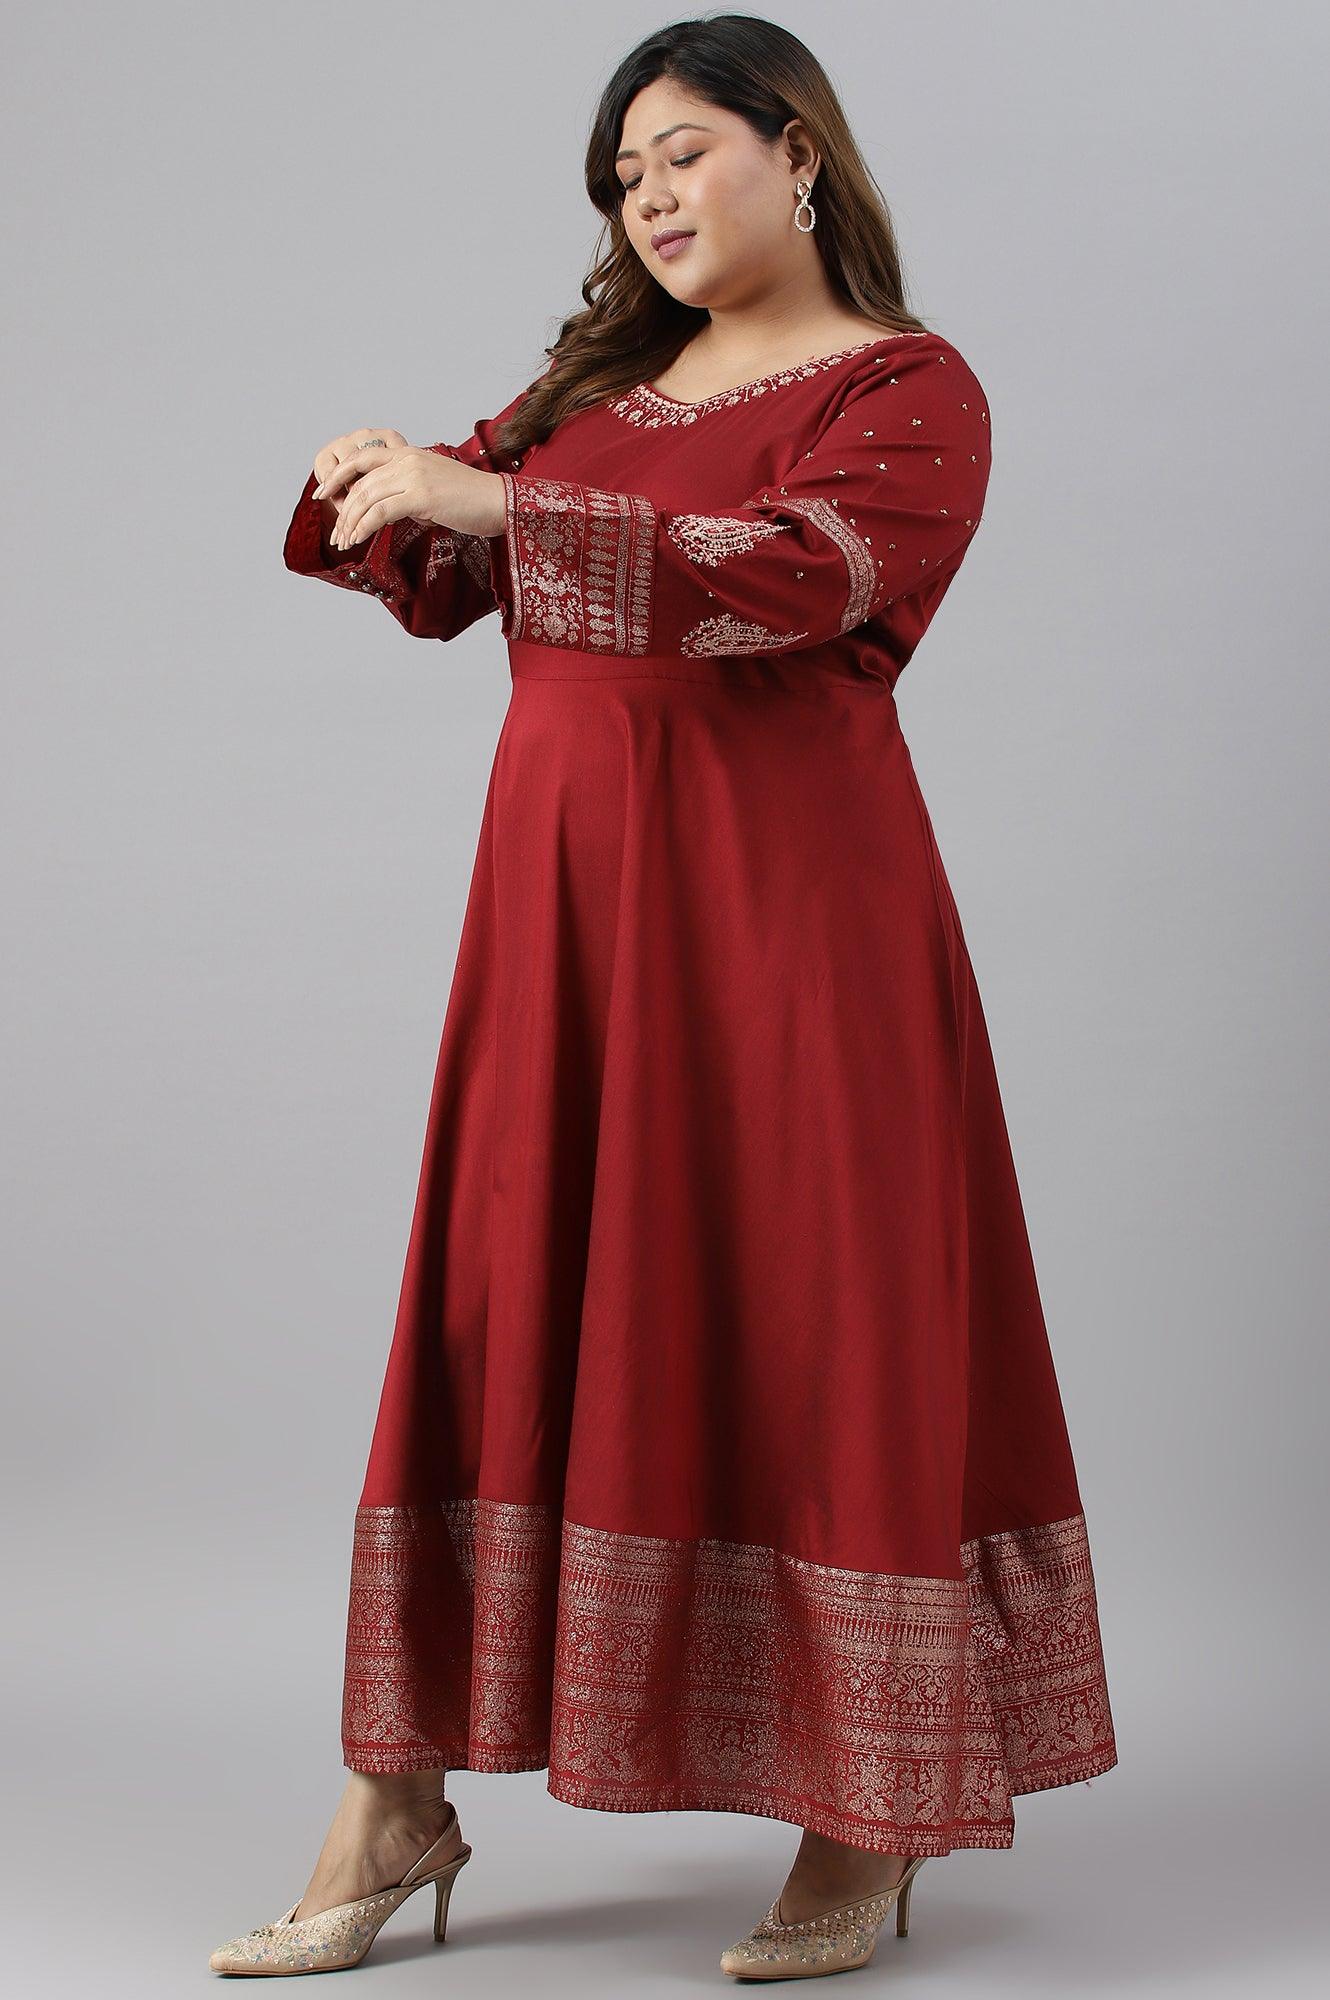 Maroon Festive Plus Size Gown With Embroidery On Neck And Sleeves - wforwoman